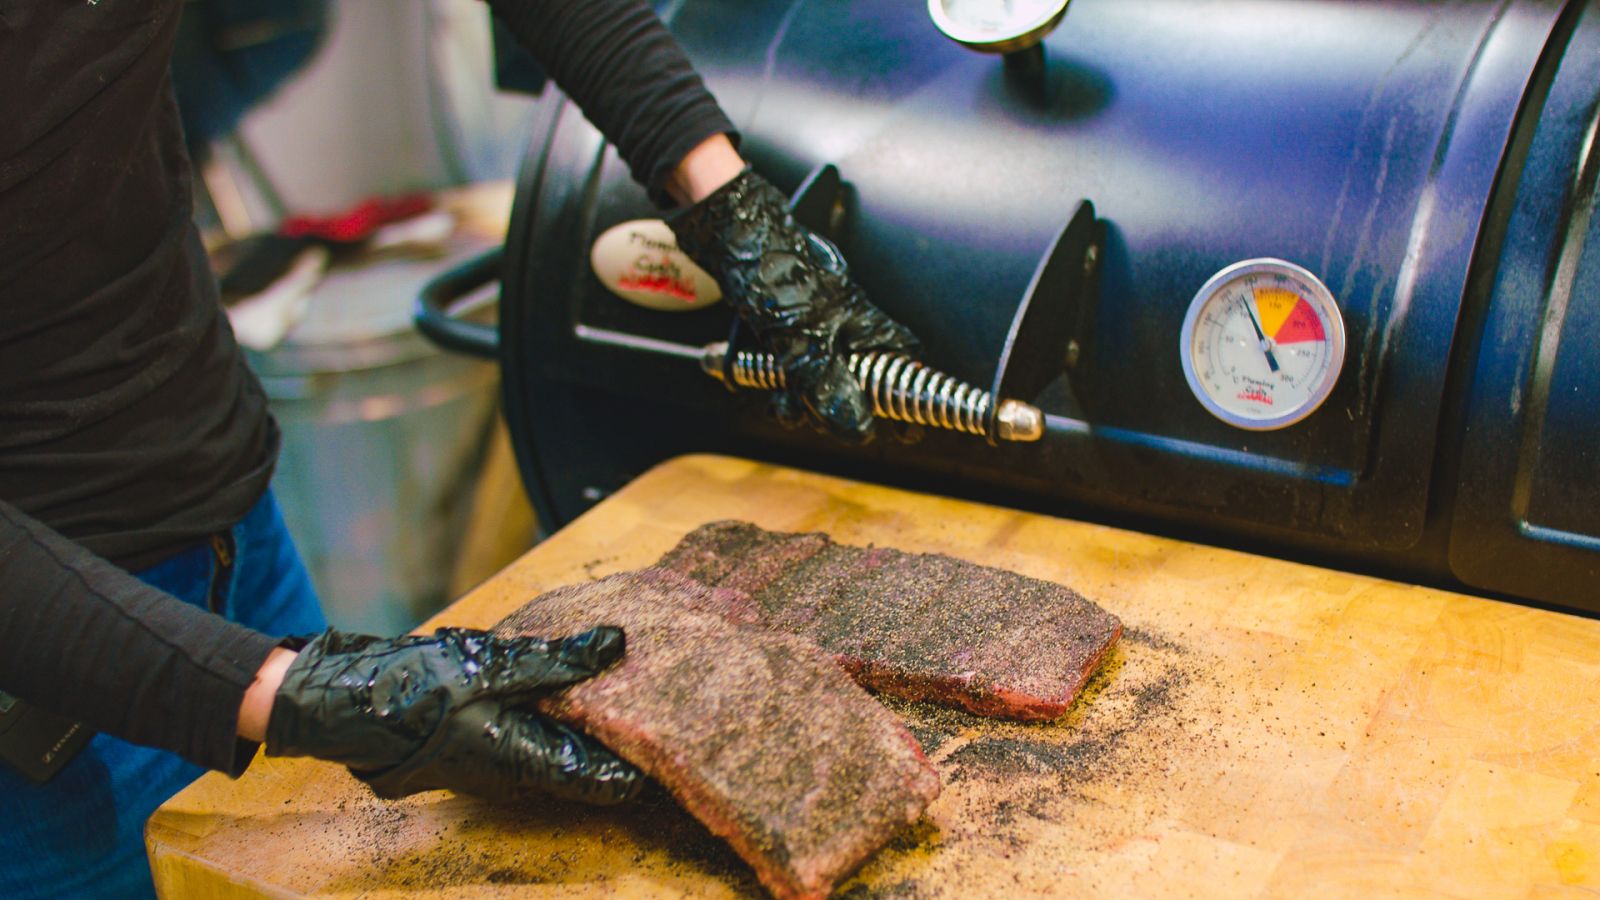 This image shows the beef ribs are being placed in the Offset Smoker